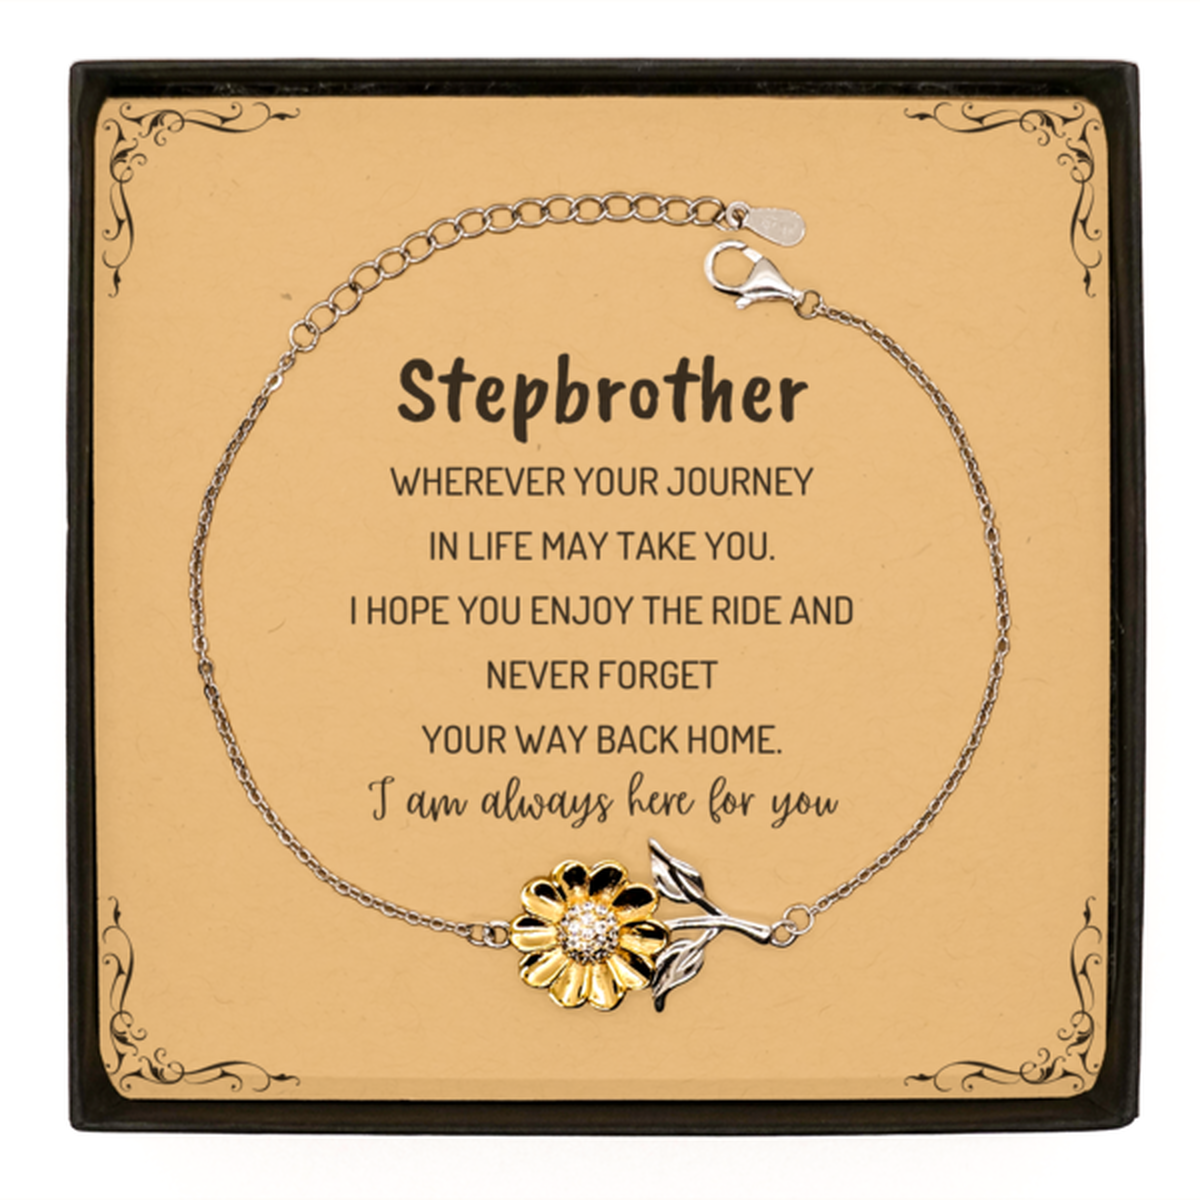 Stepbrother wherever your journey in life may take you, I am always here for you Stepbrother Sunflower Bracelet, Awesome Christmas Gifts For Stepbrother Message Card, Stepbrother Birthday Gifts for Men Women Family Loved One